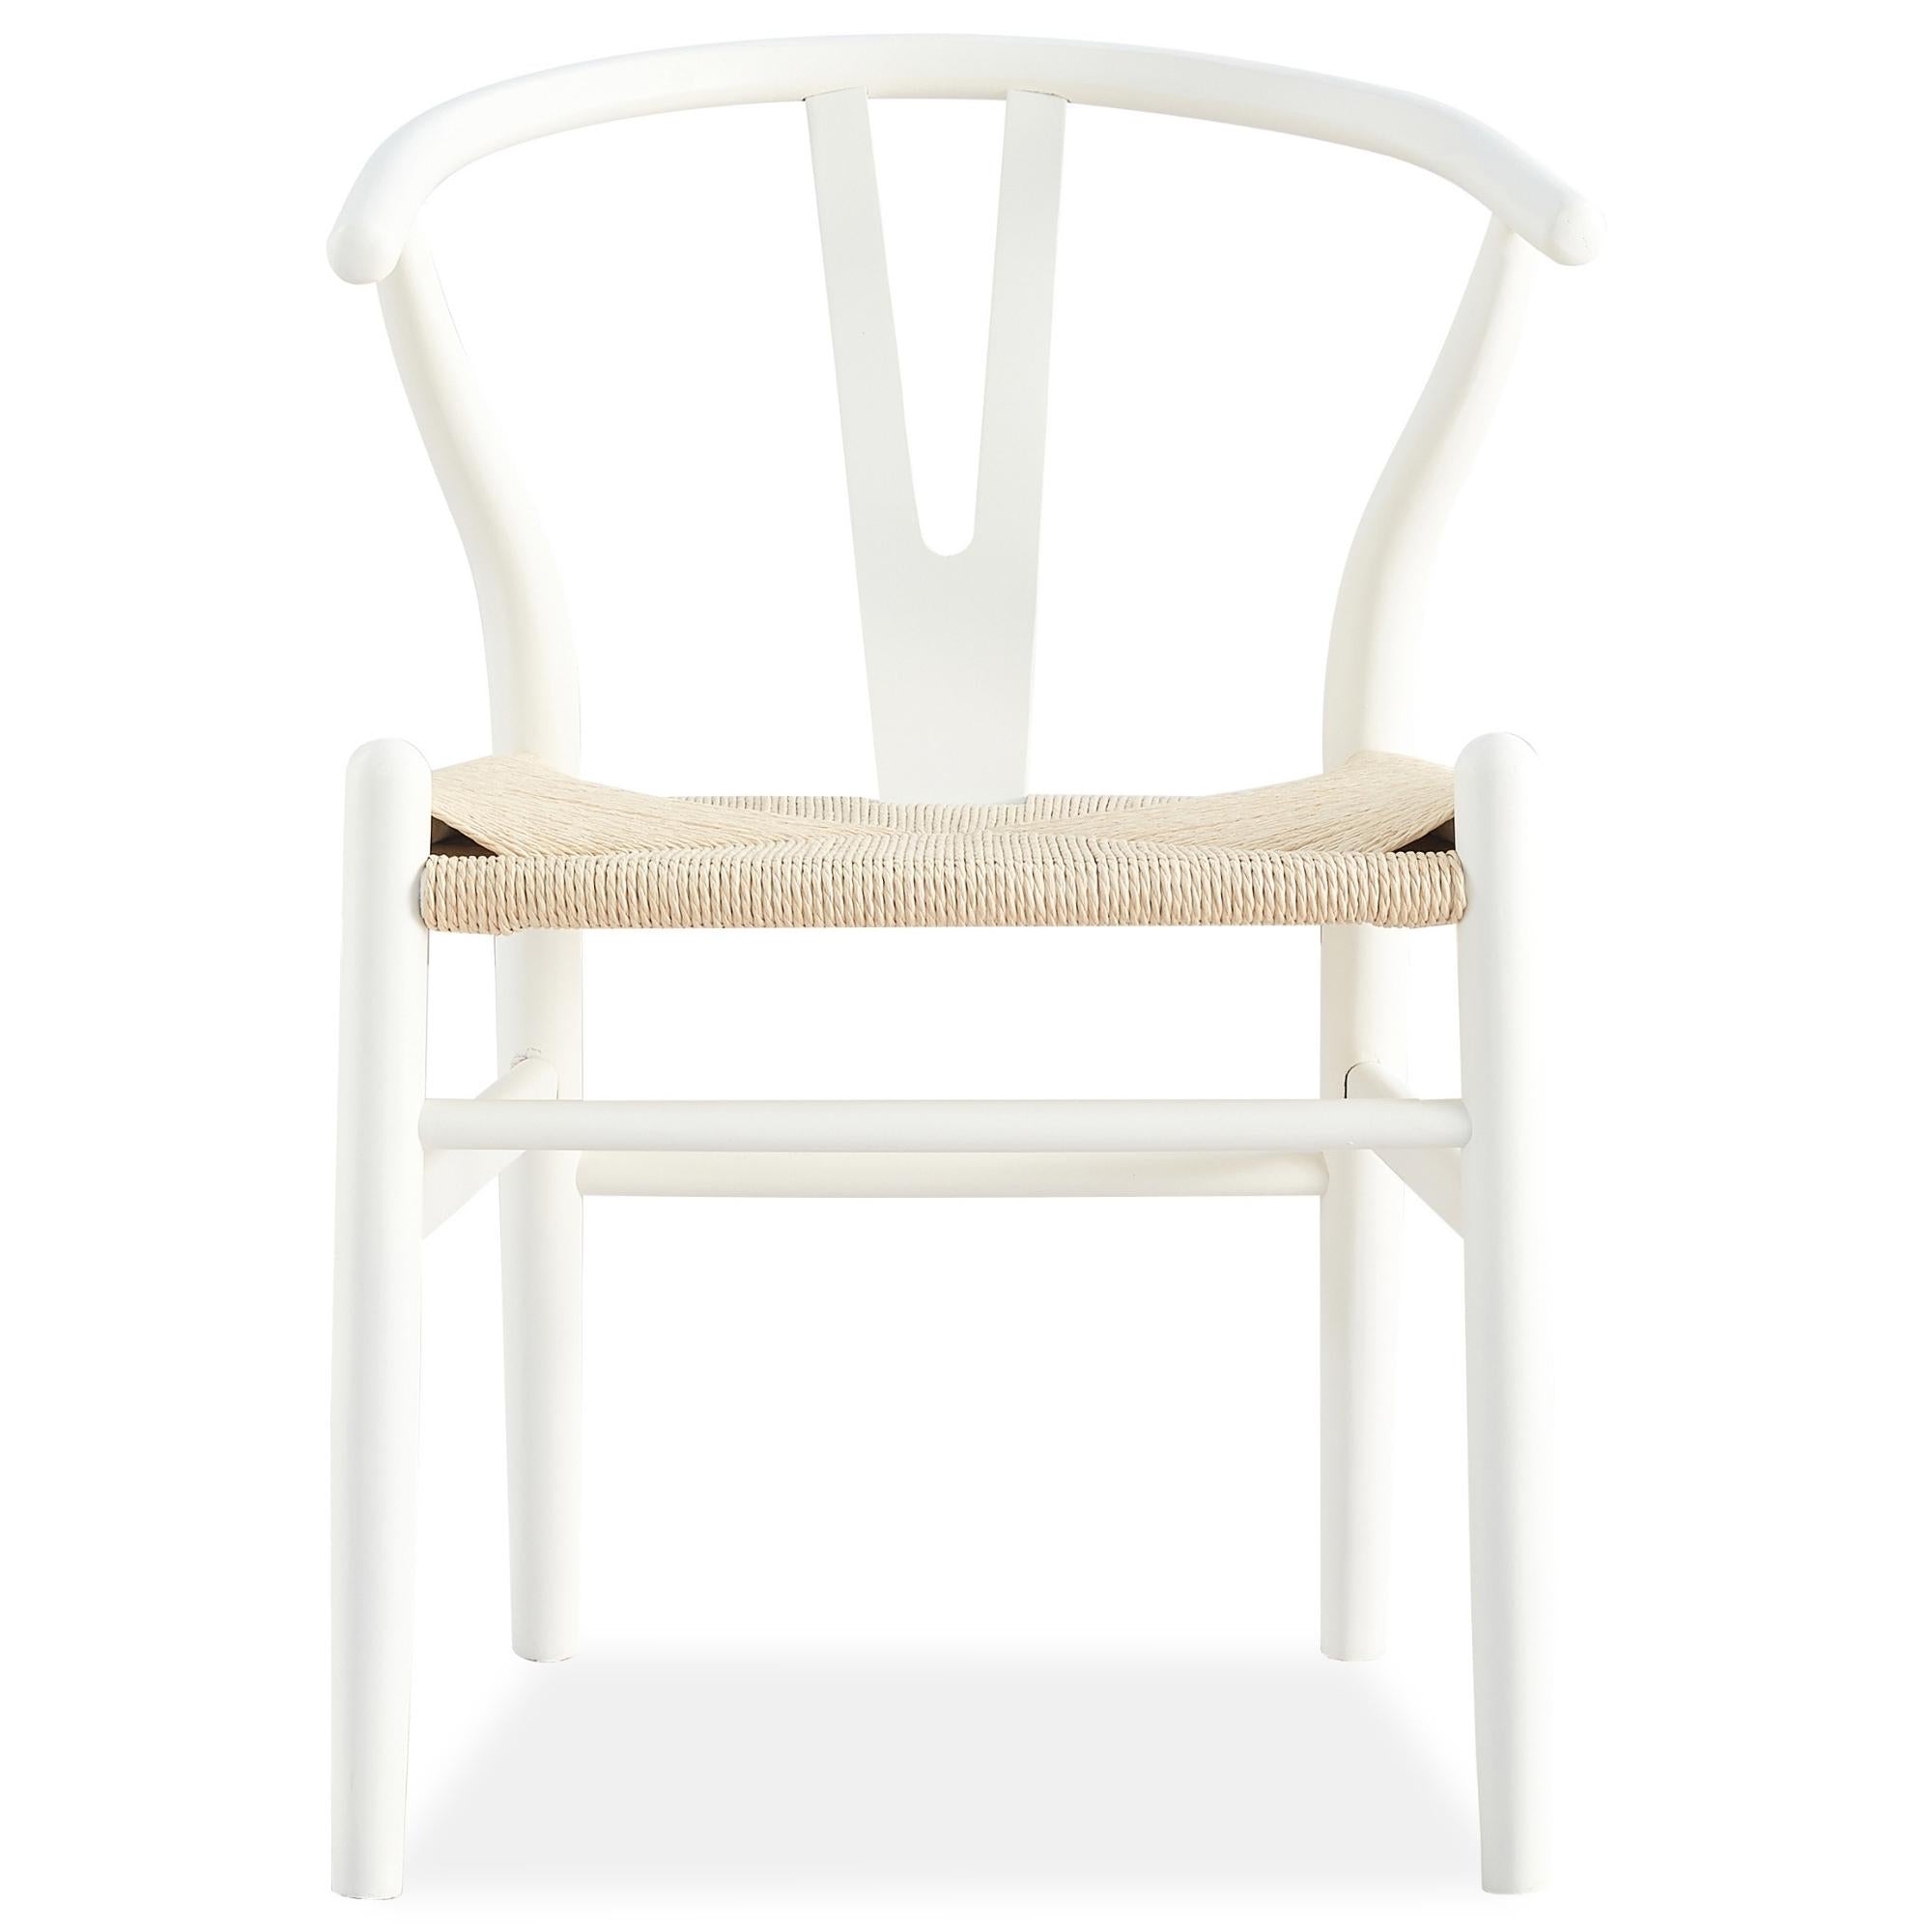 Anemone  Set of 2 Wishbone Dining Chair Beech Timber Replica Hans Wenger - White Deals499